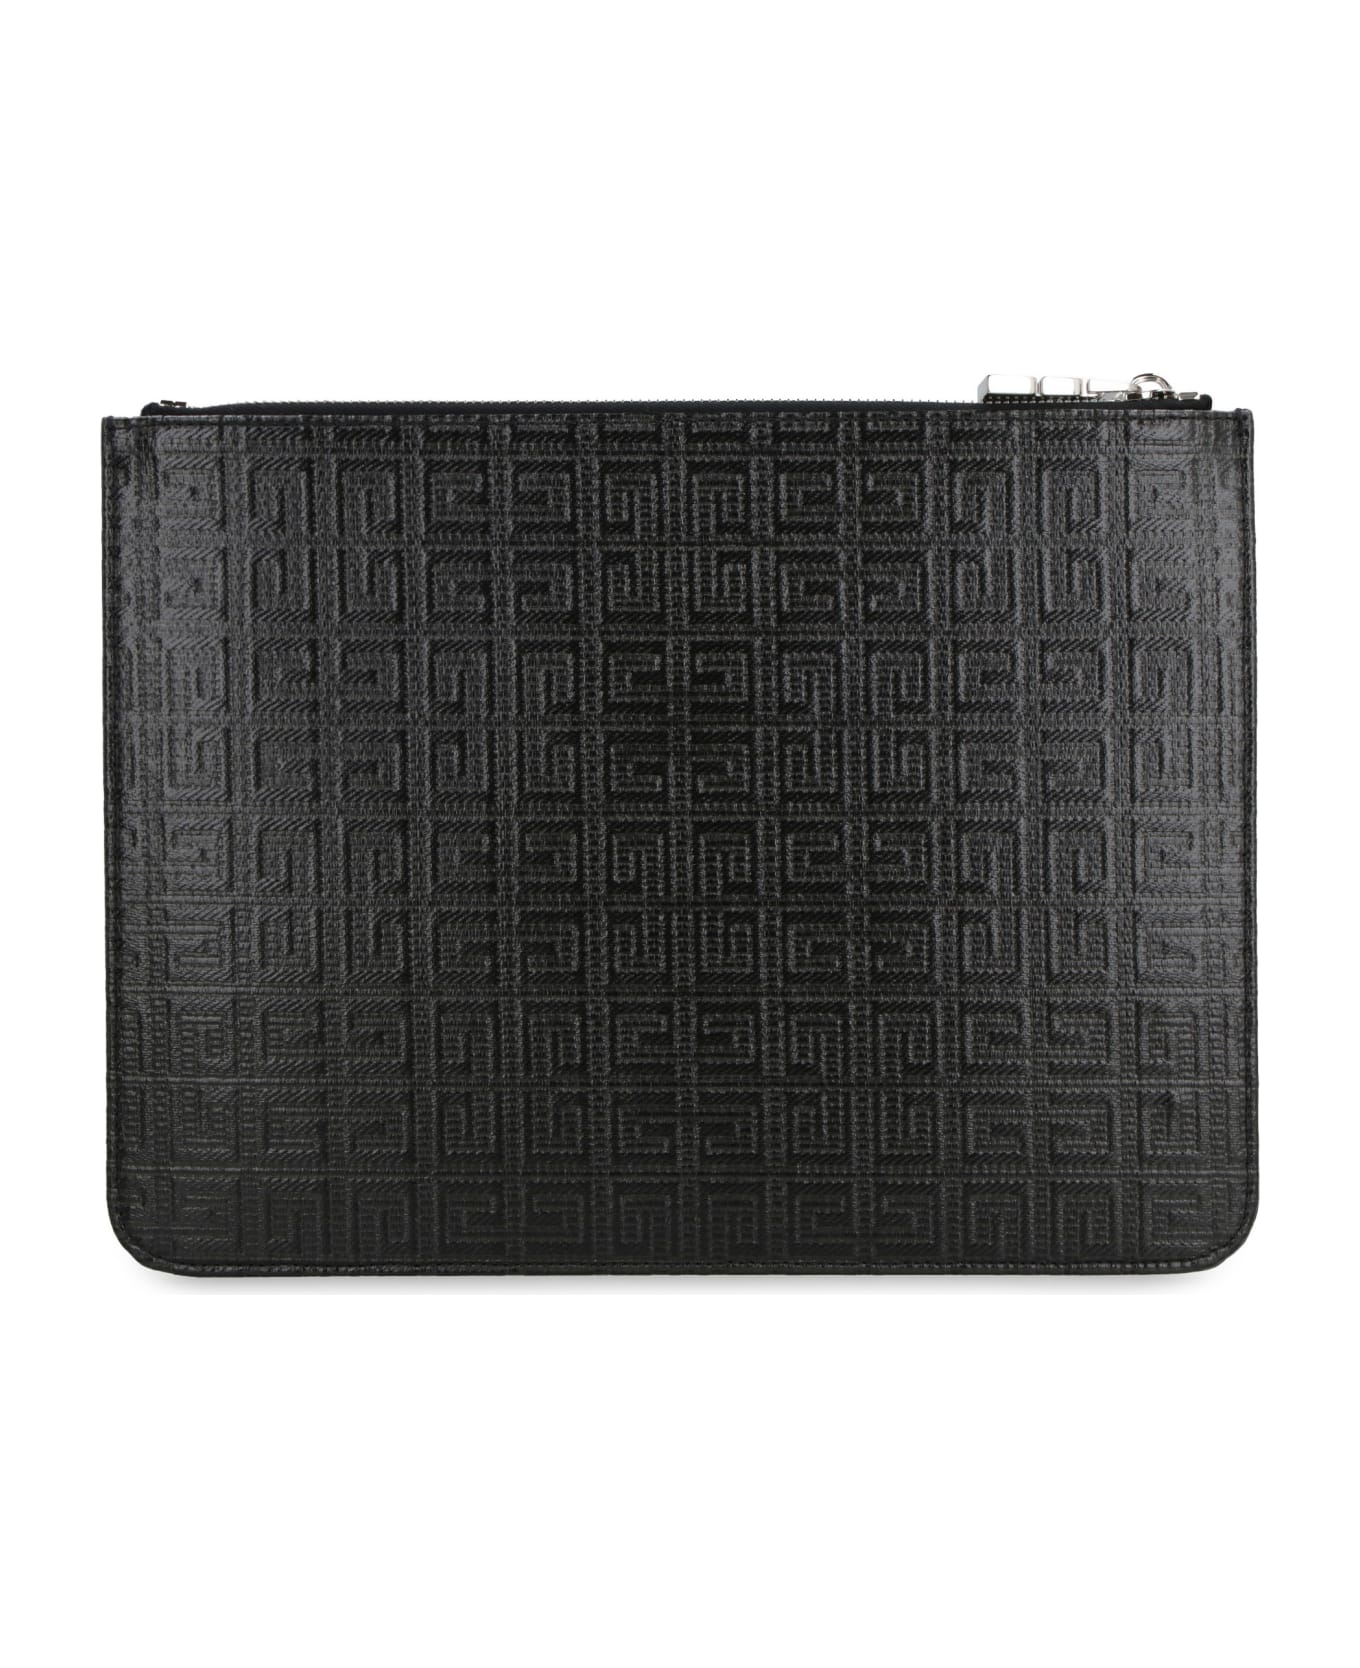 Givenchy 4g Coated Canvas Flat Pouch - black トラベルバッグ